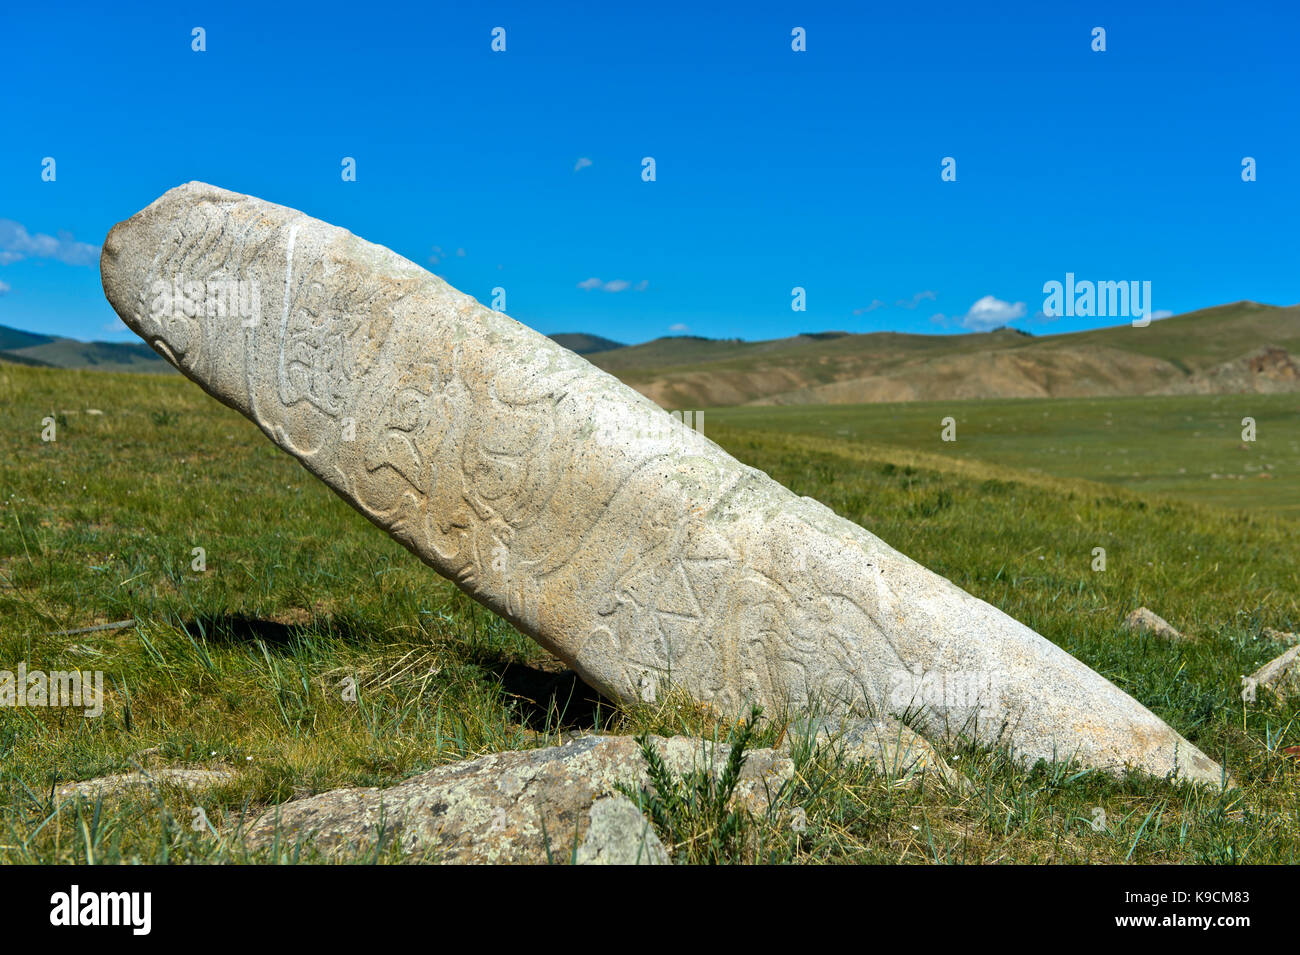 Megalith called deer stone decorated  of an ancient grave site from the Bronze Age, Khangai Nuruu National Park, Oevoerkhangai Aimag, Mongolia Stock Photo